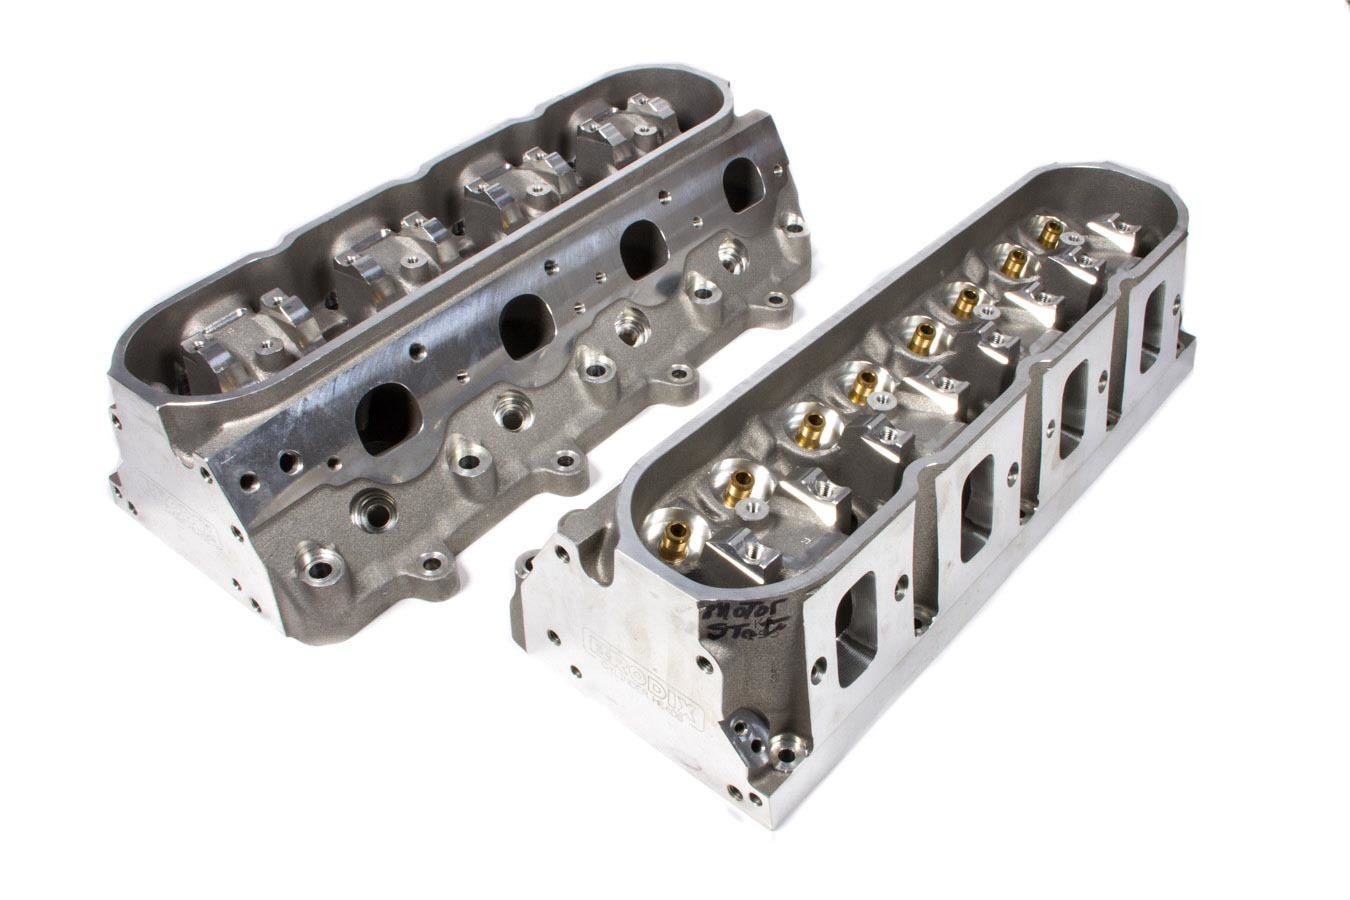 Brodix 1170000 Cylinder Head, BR 7, Bare, 2.204 / 1.614 in Valves, 262 cc Intake, 71 cc Chamber, Aluminum, GM LS-Series, Pair